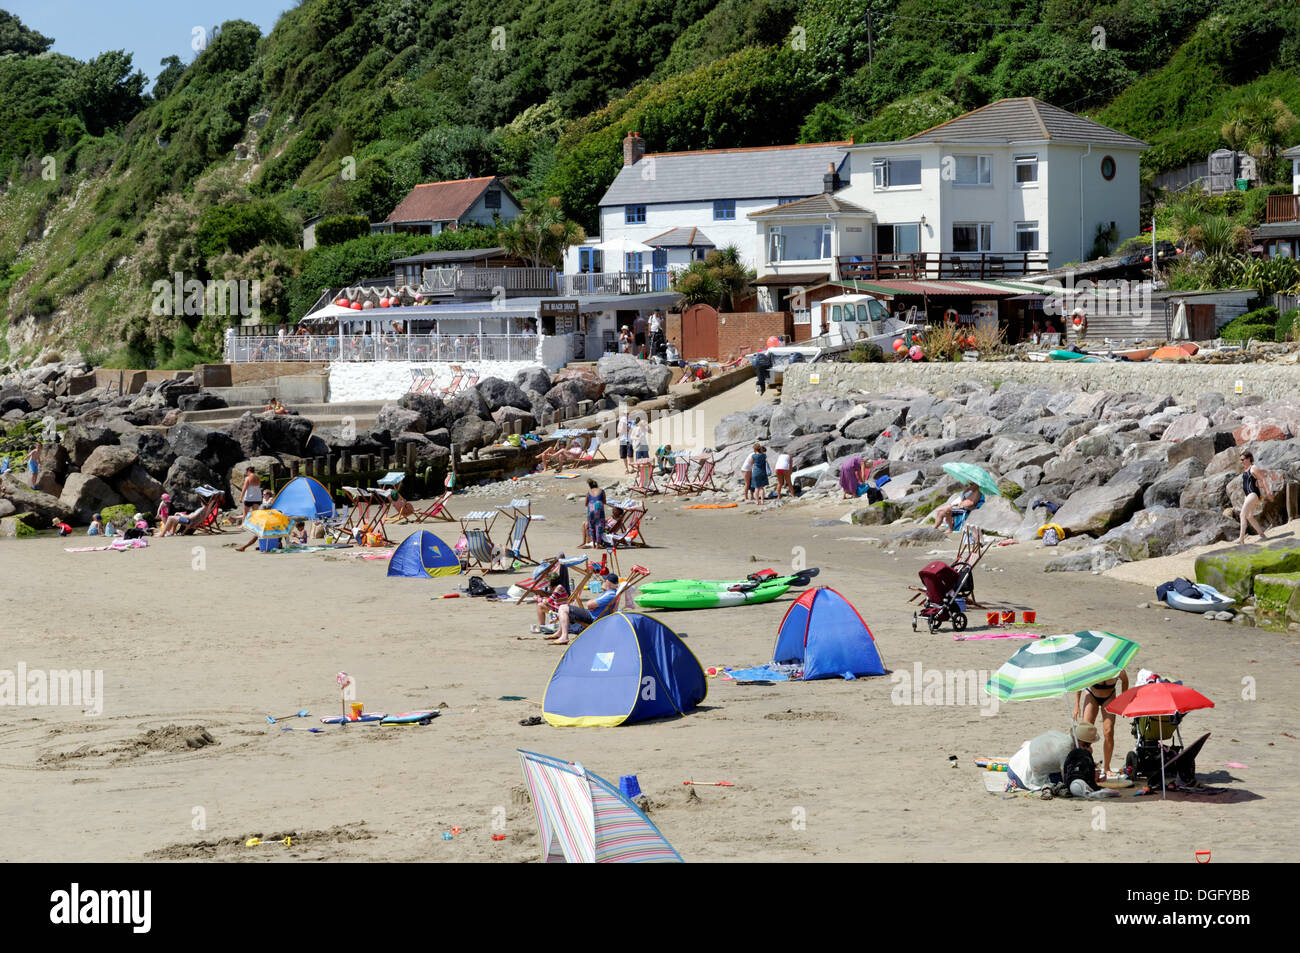 Steephill Cove,Whitwell, Ventnor, Isle of Wight, England, UK. Stock Photo